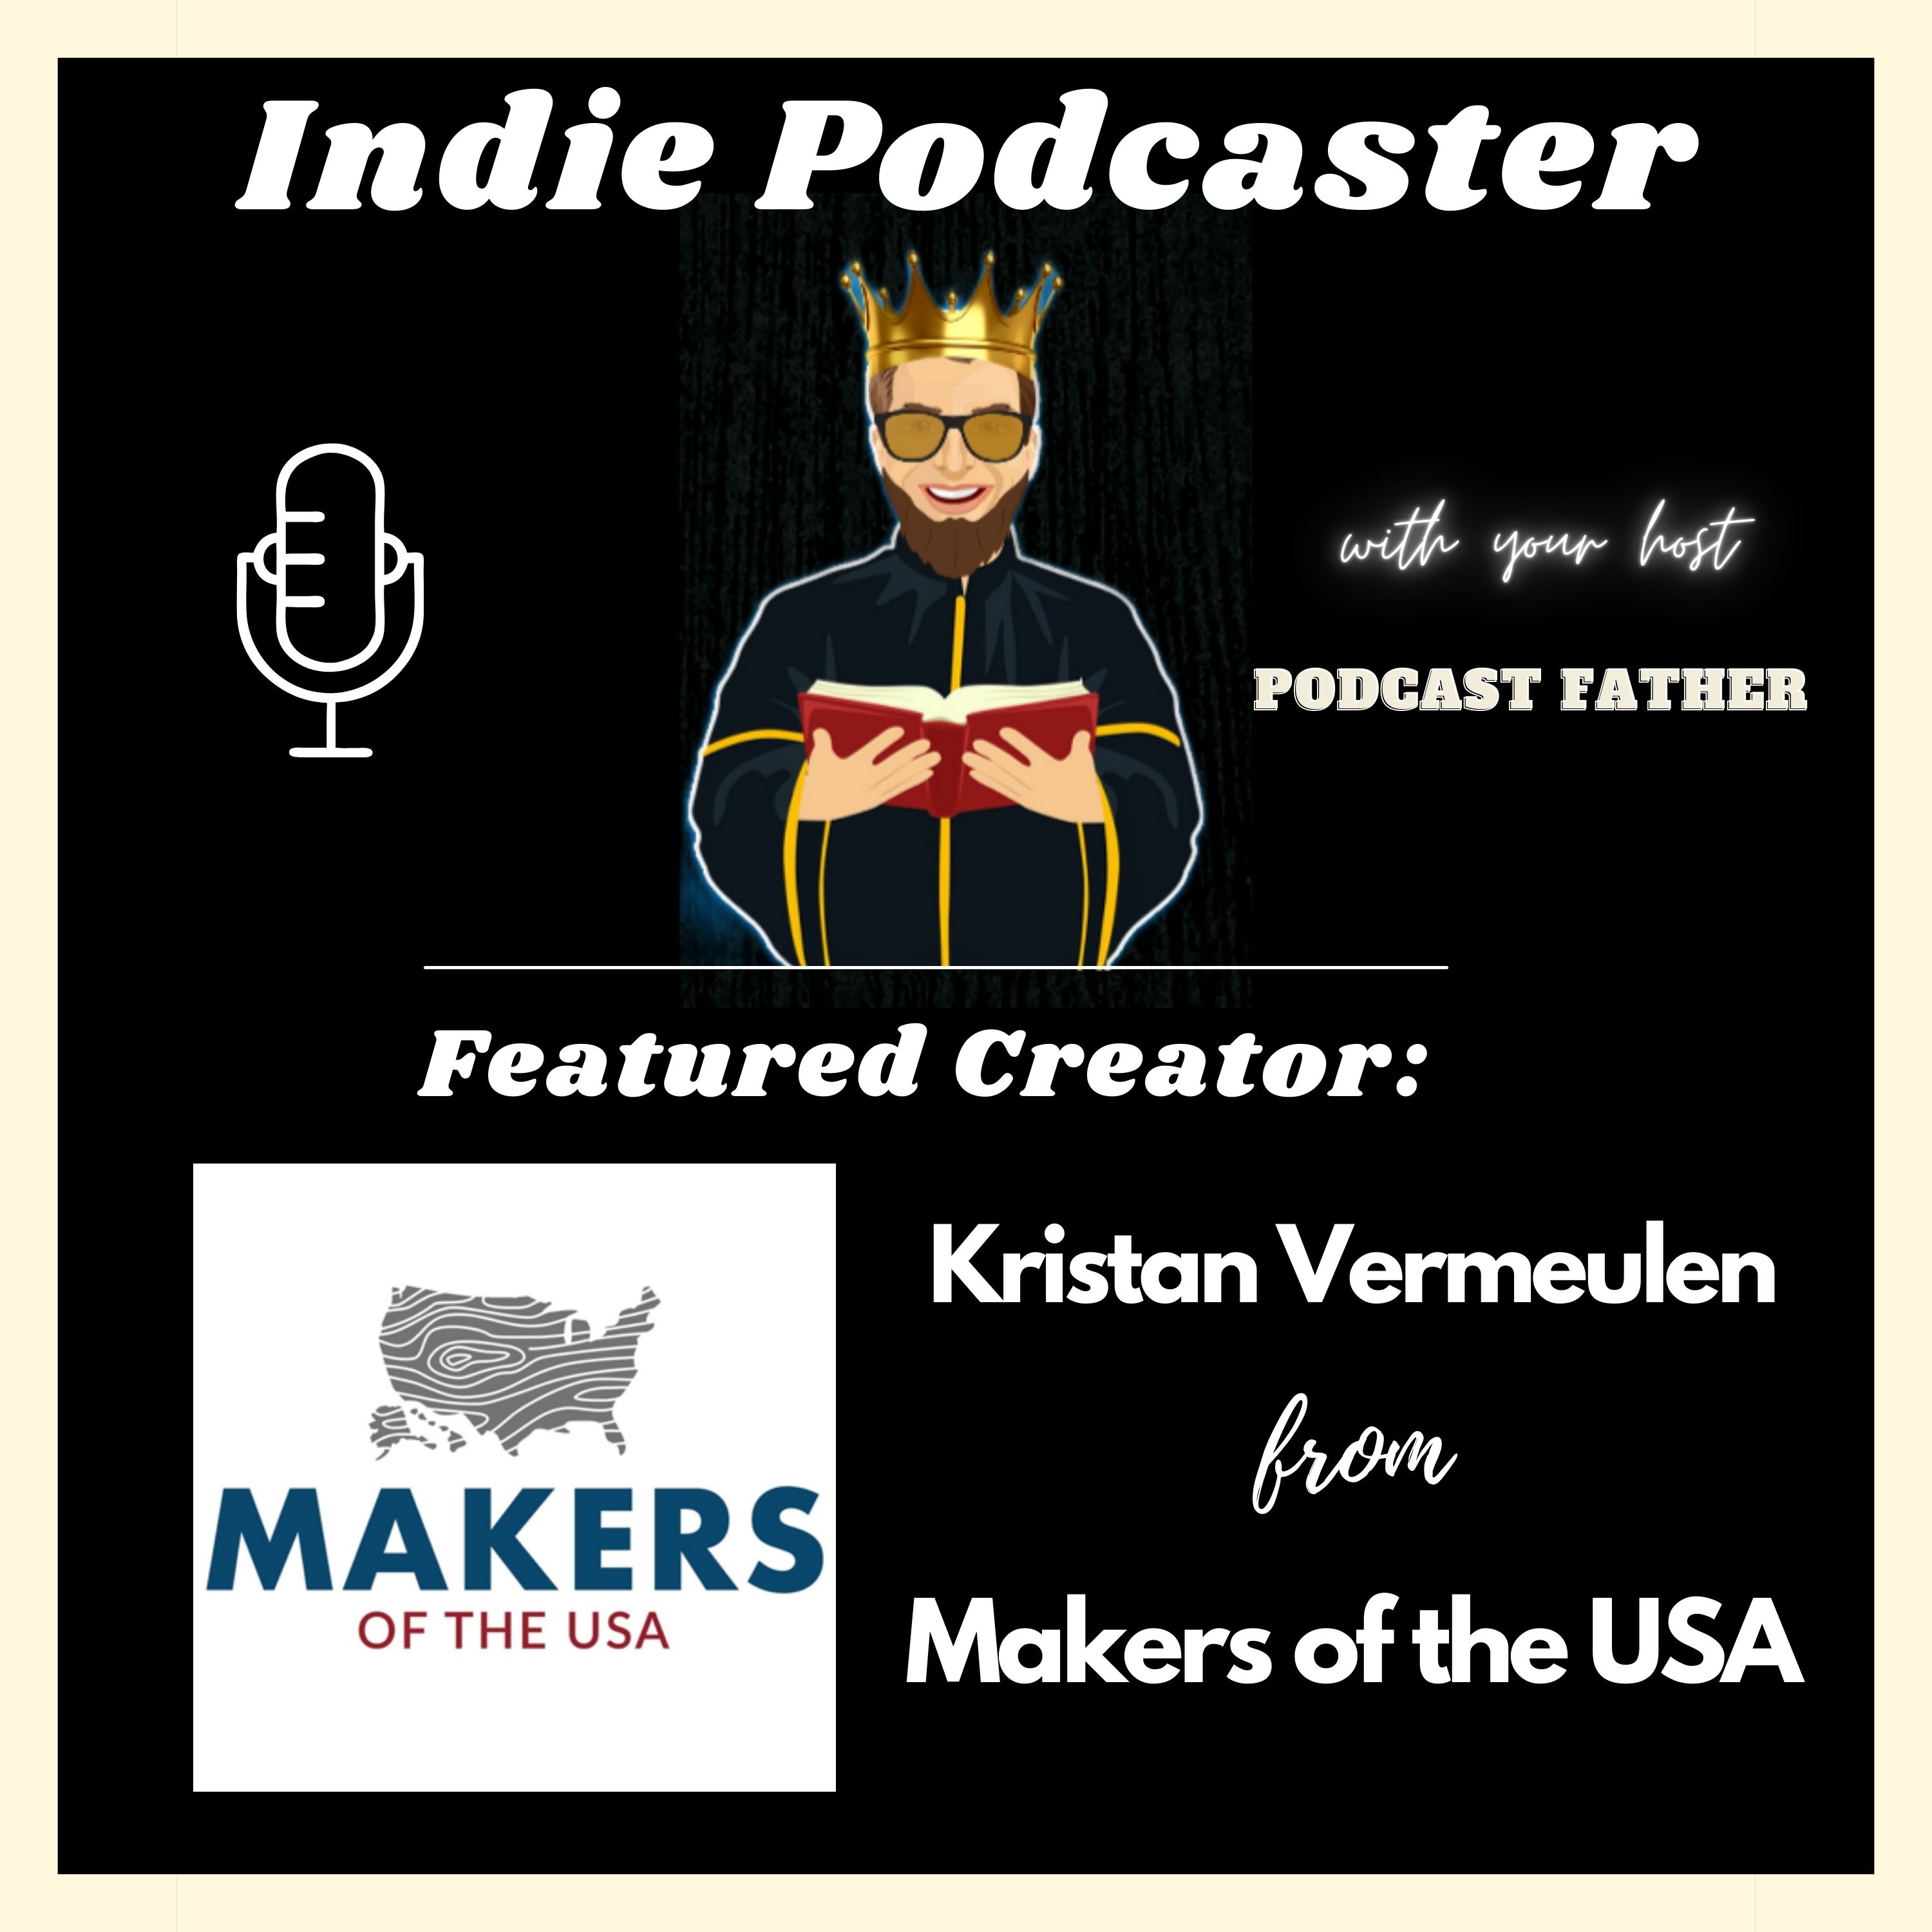 Kristan Vermeulen from Makers of the USA Image